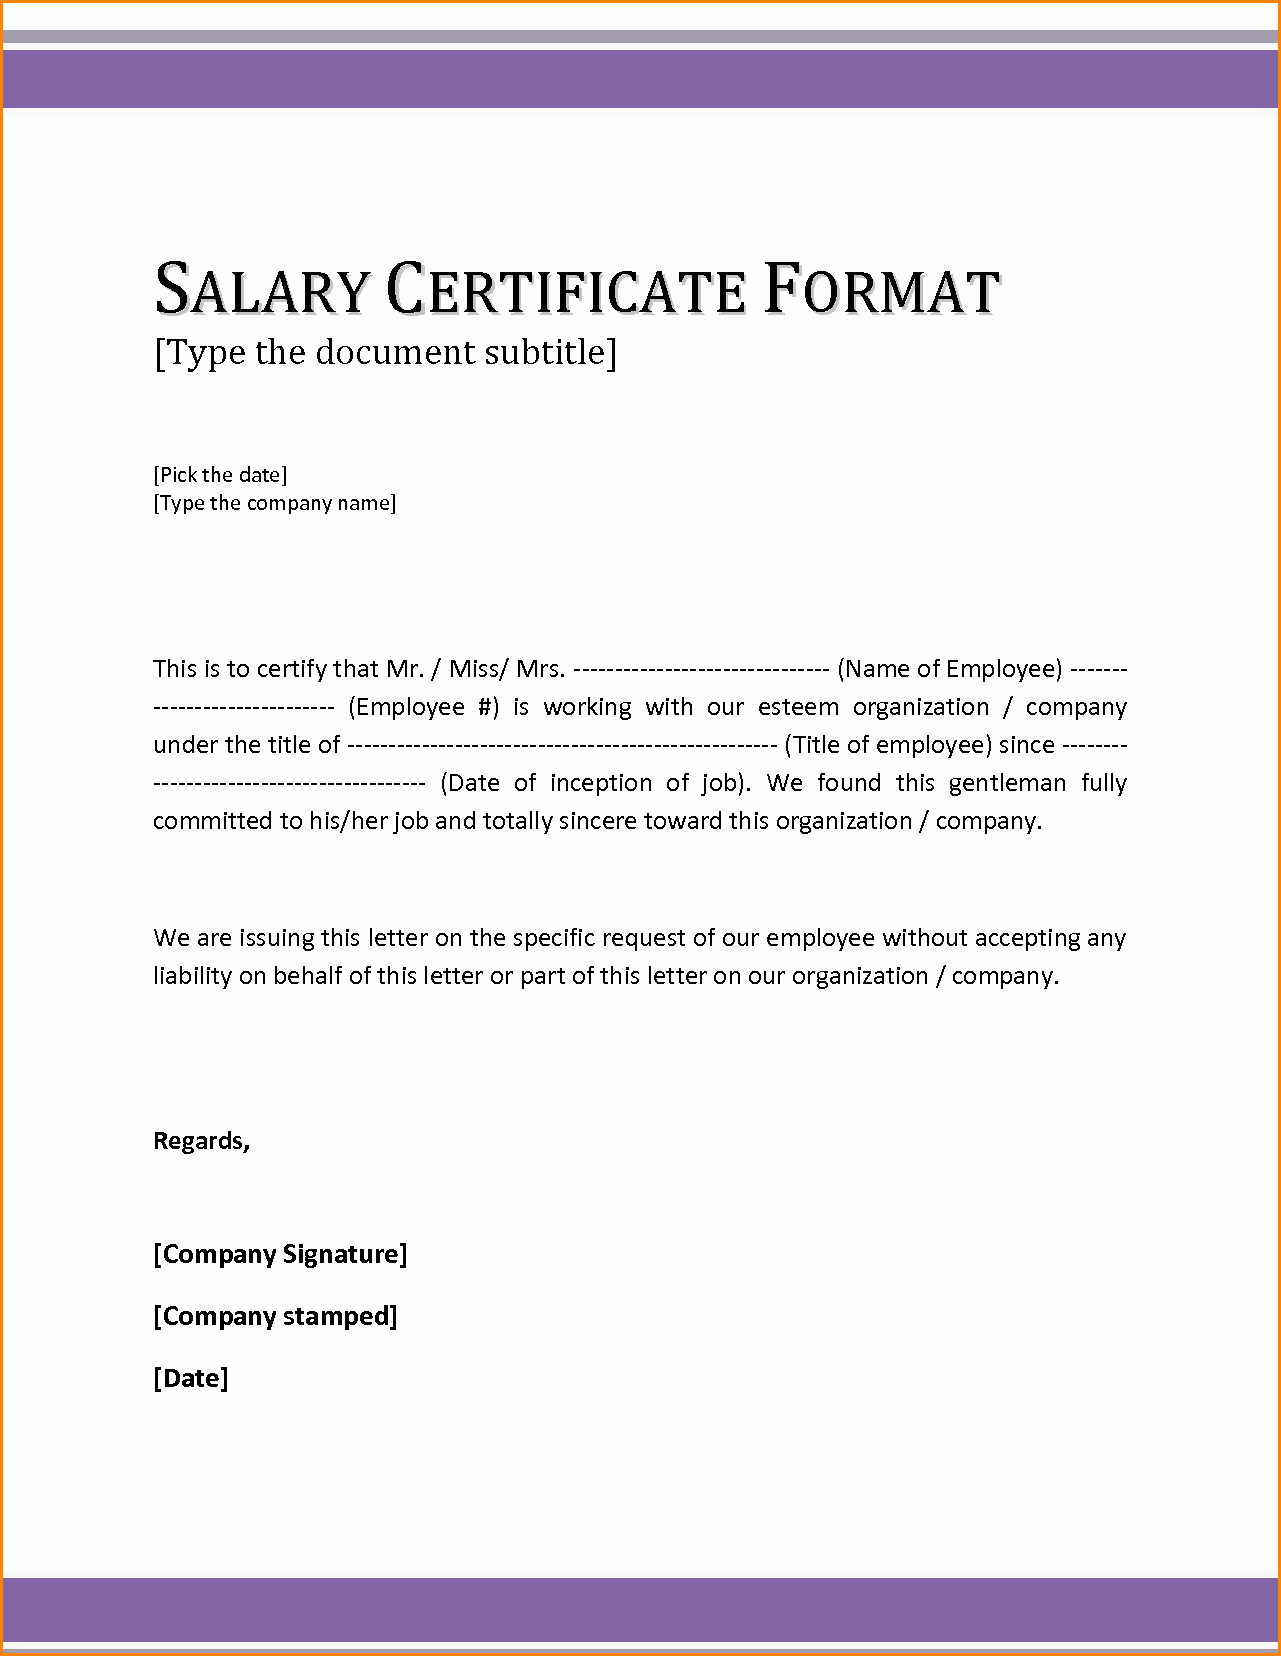 Sample Of Certificate Of Employment Best Of 6 Sample Of Certificate Of Employment with Salary